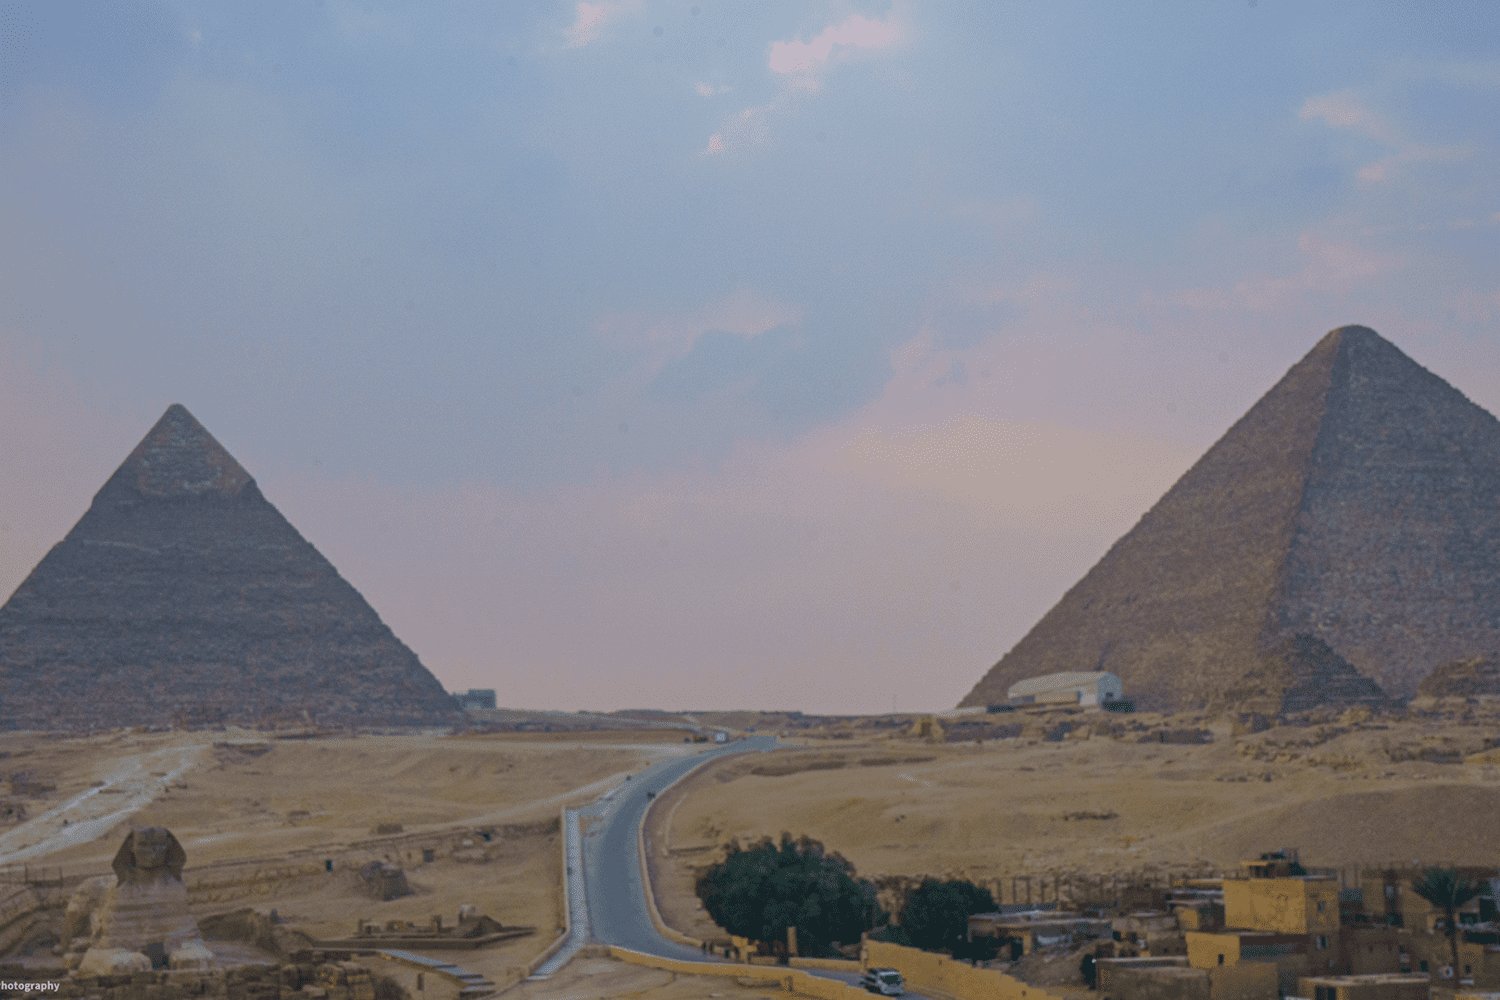 The Pyramids of Giza - Cairo | Day & Night at the Pyramids Tour | Egypt in the Golden Age of Travel Luxury Tour